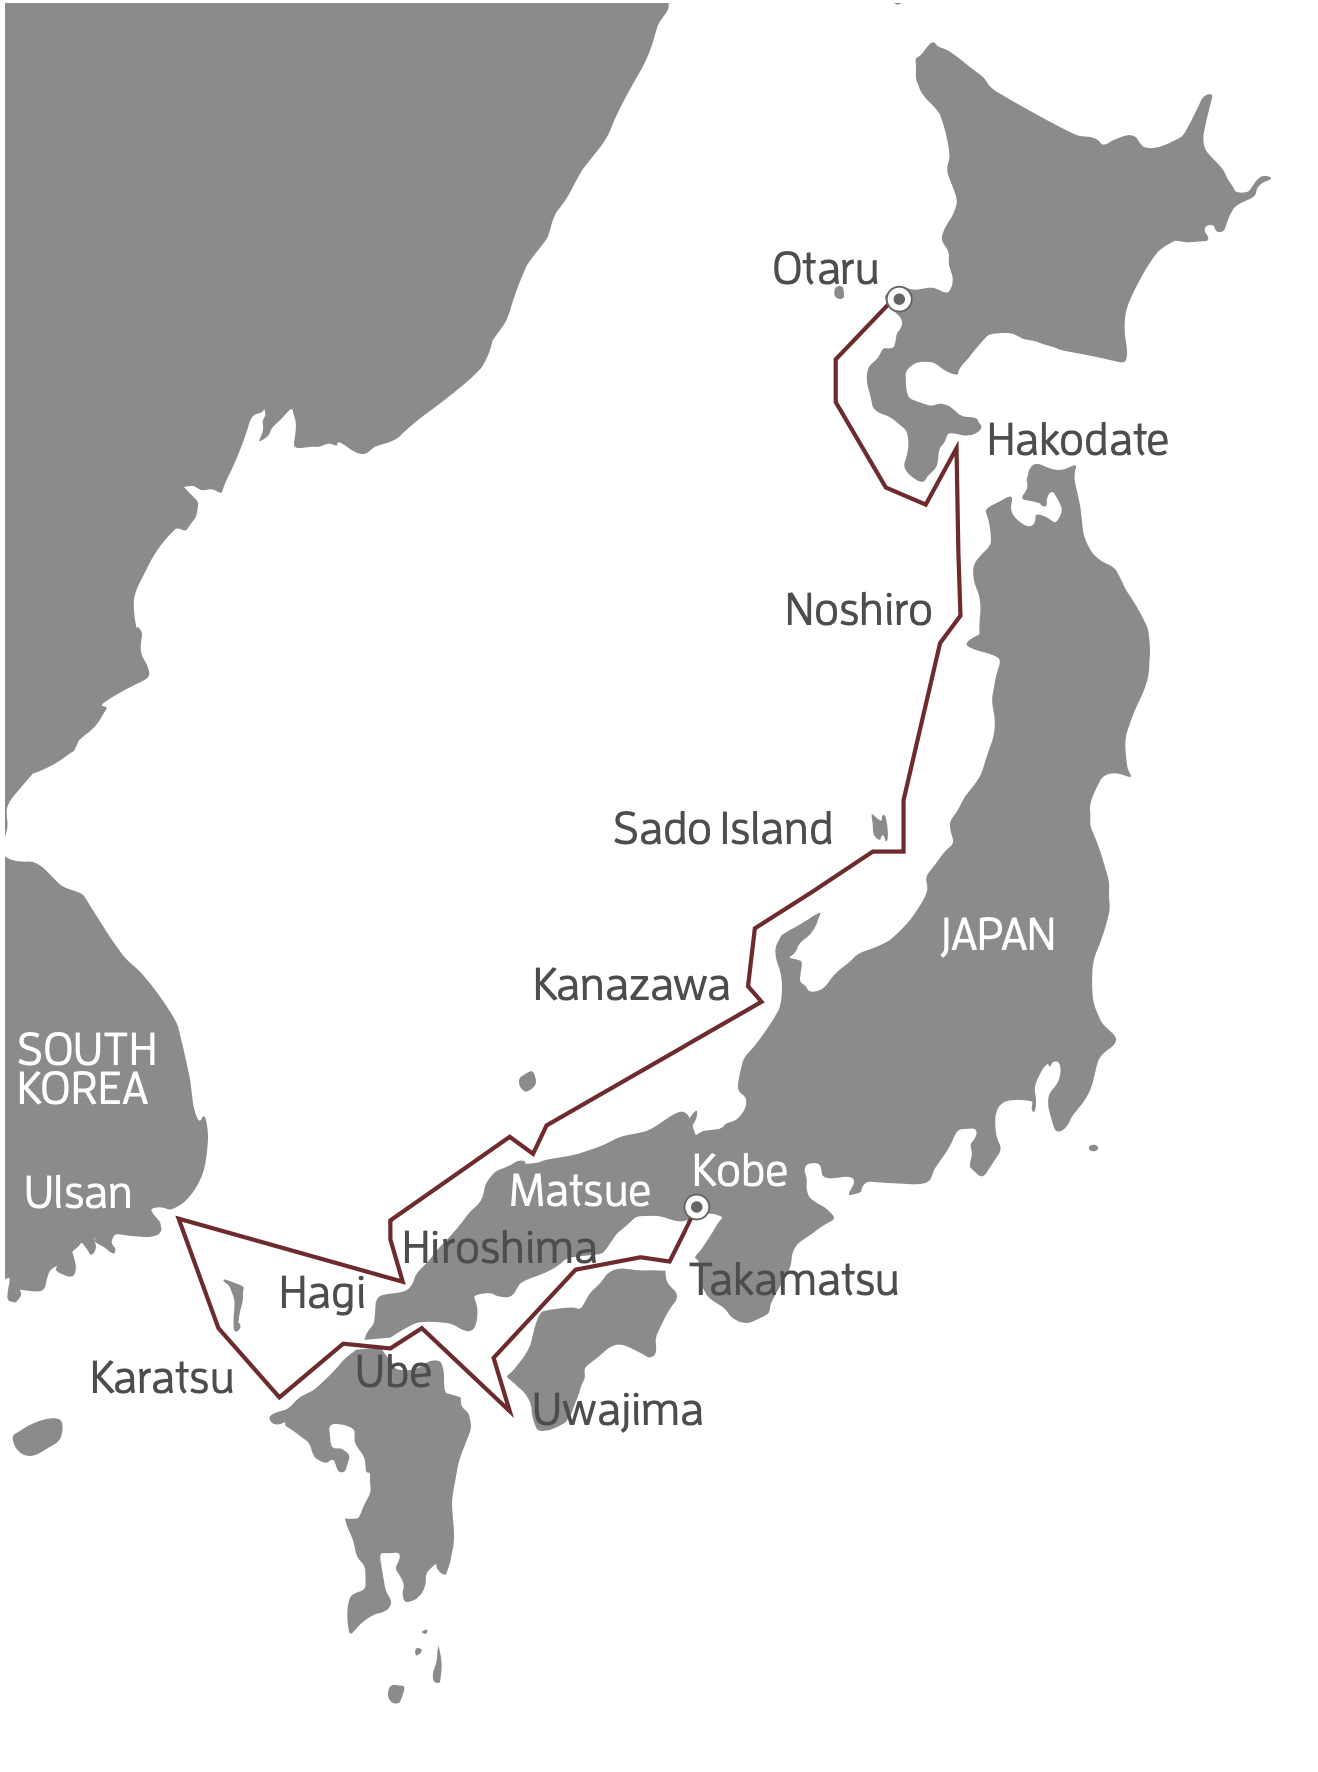 Discover Eternal Japan route map